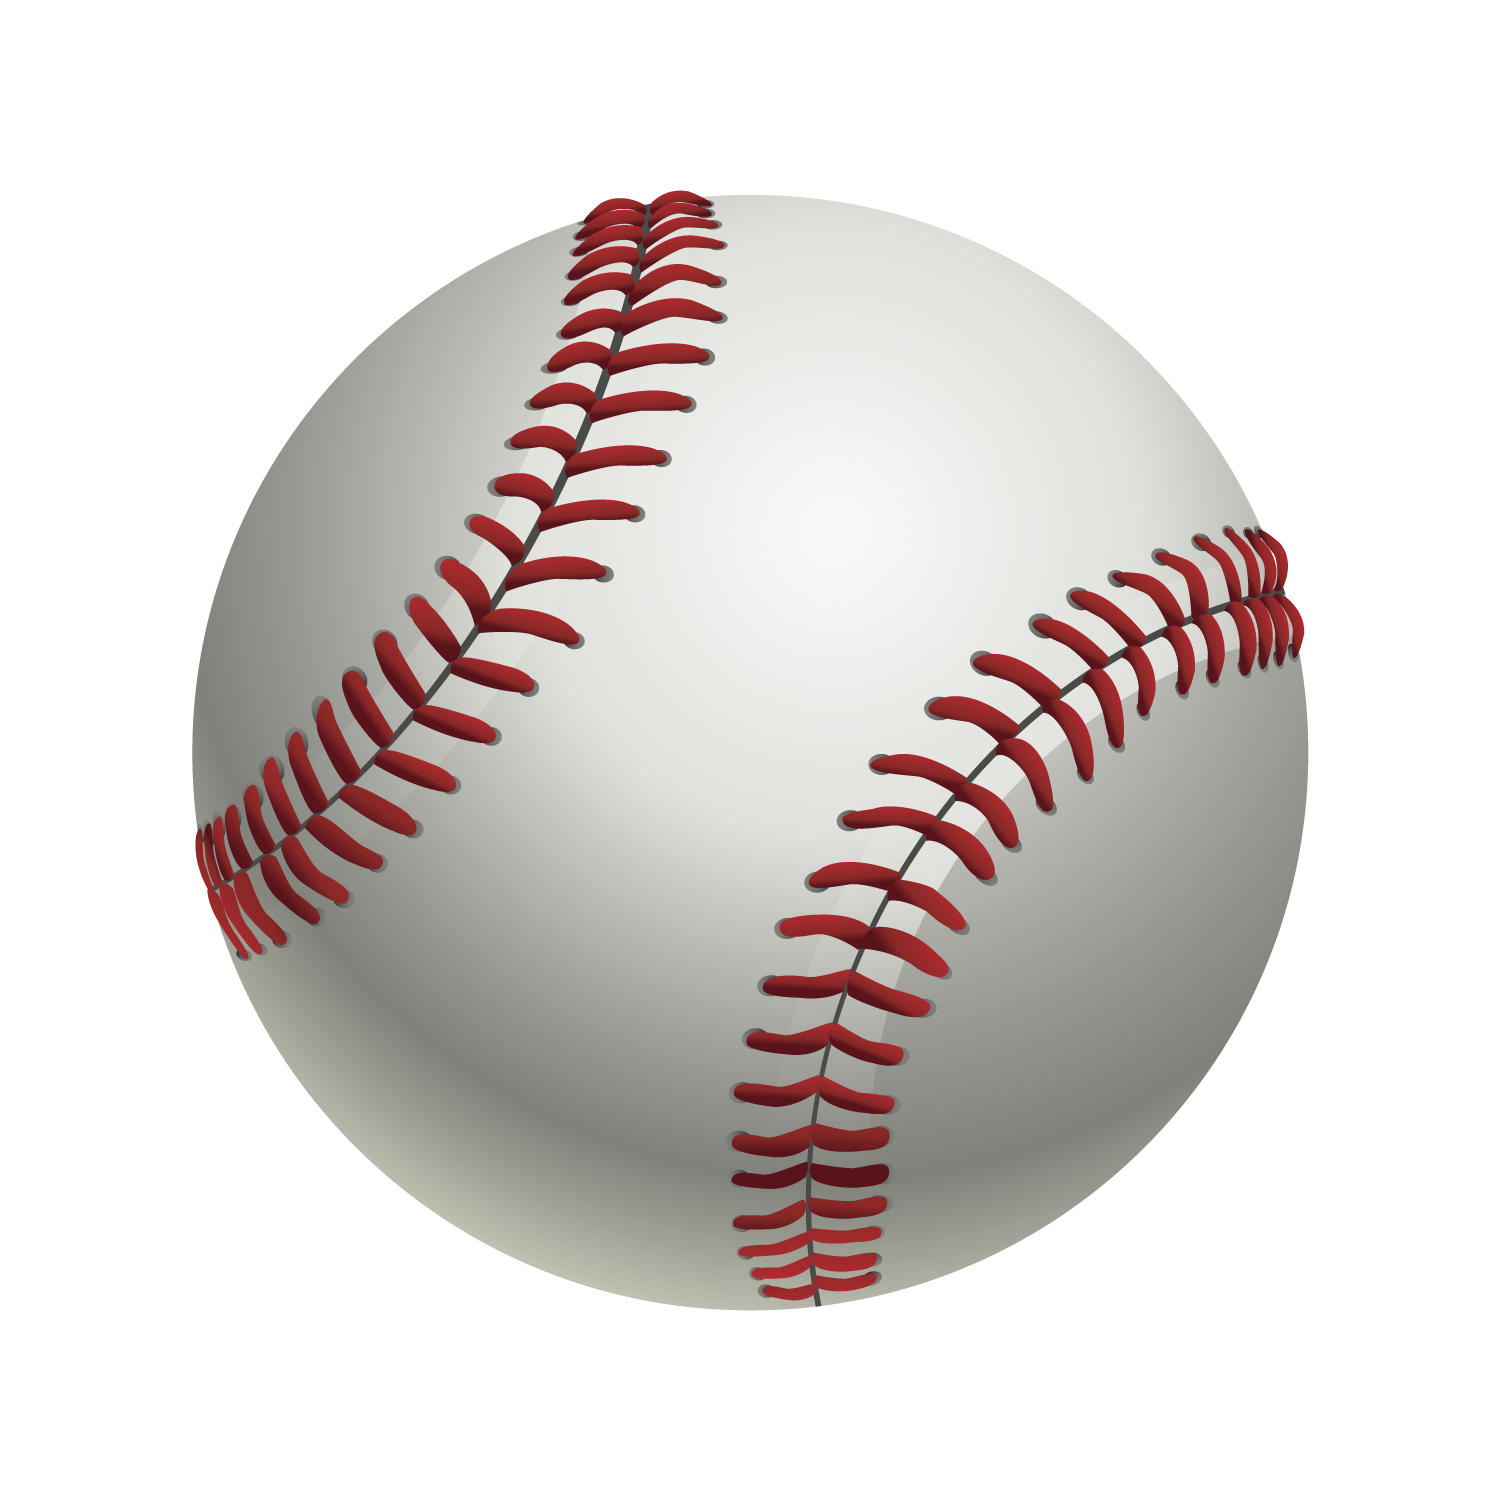 High Quality Baseball Cliparts For Free Png Transparent Background Free Download 35334 Freeiconspng